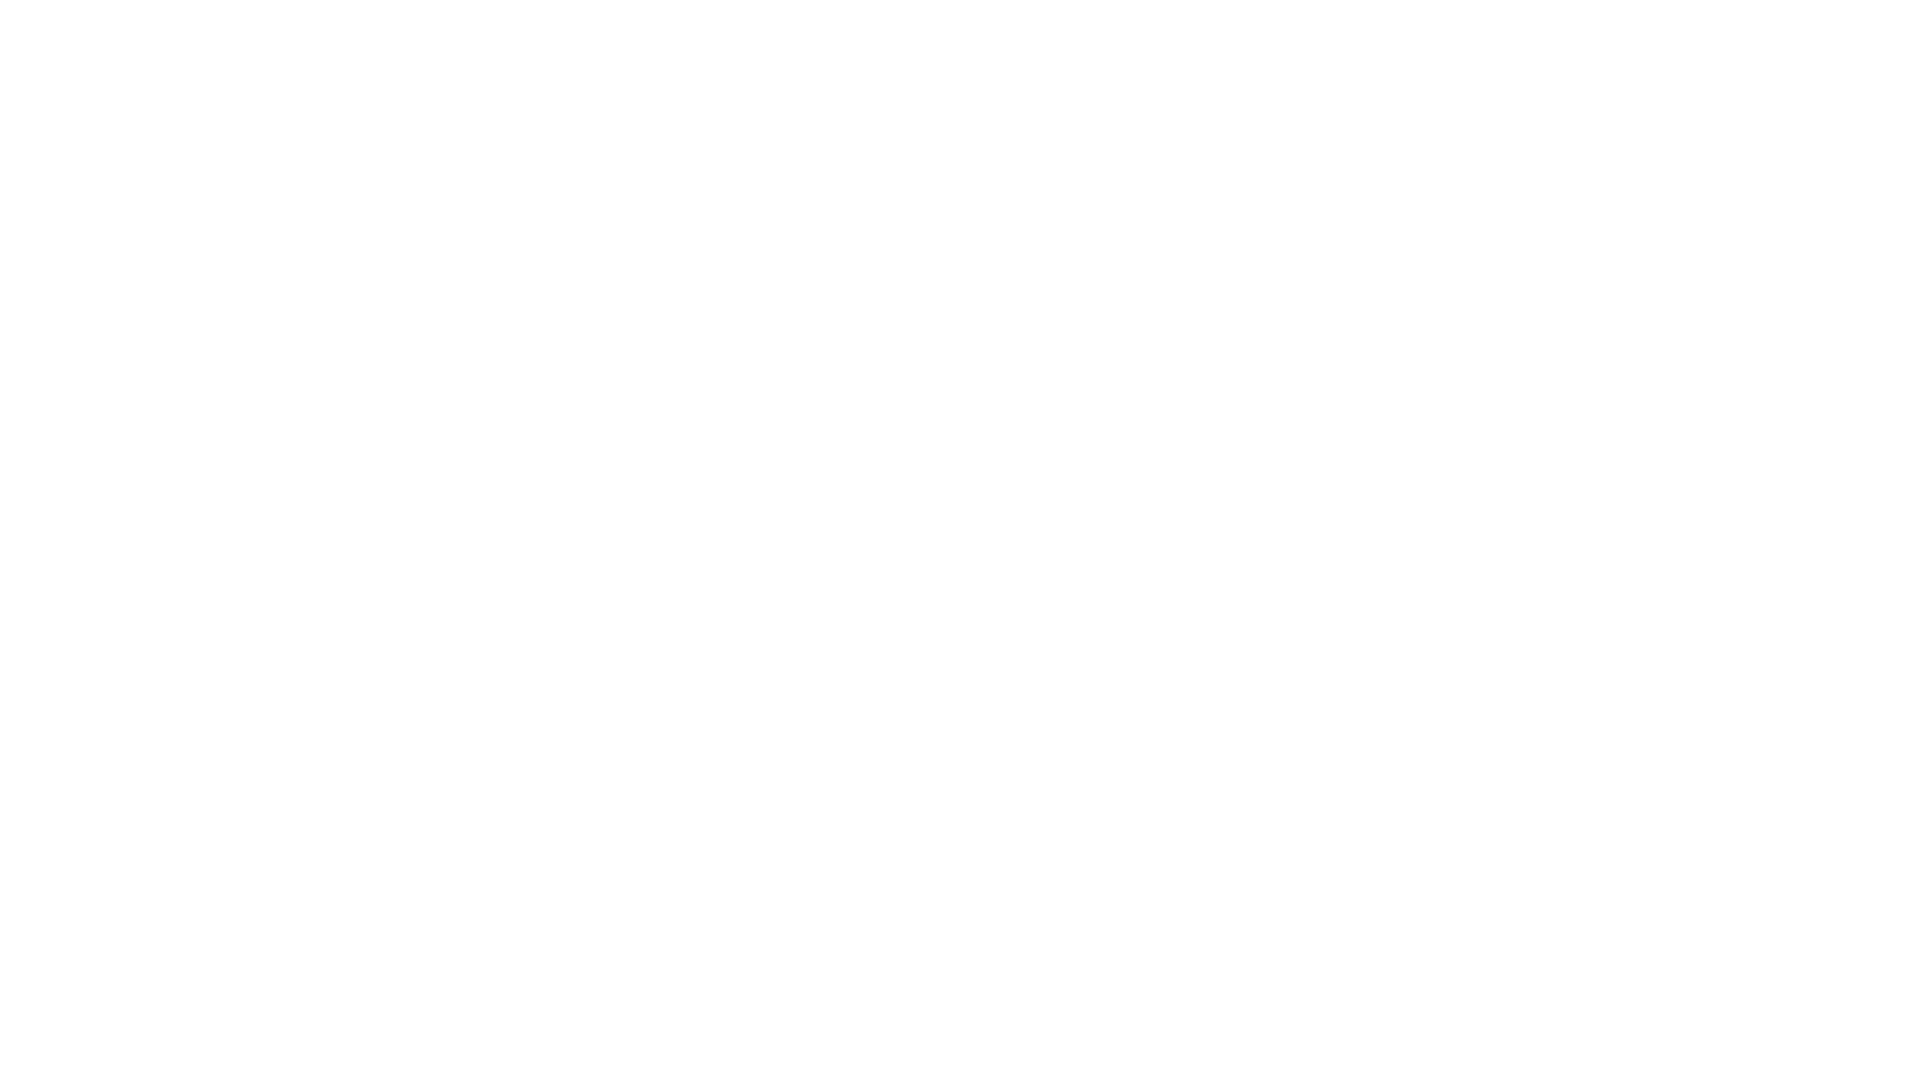 Watch The Greatest Showman